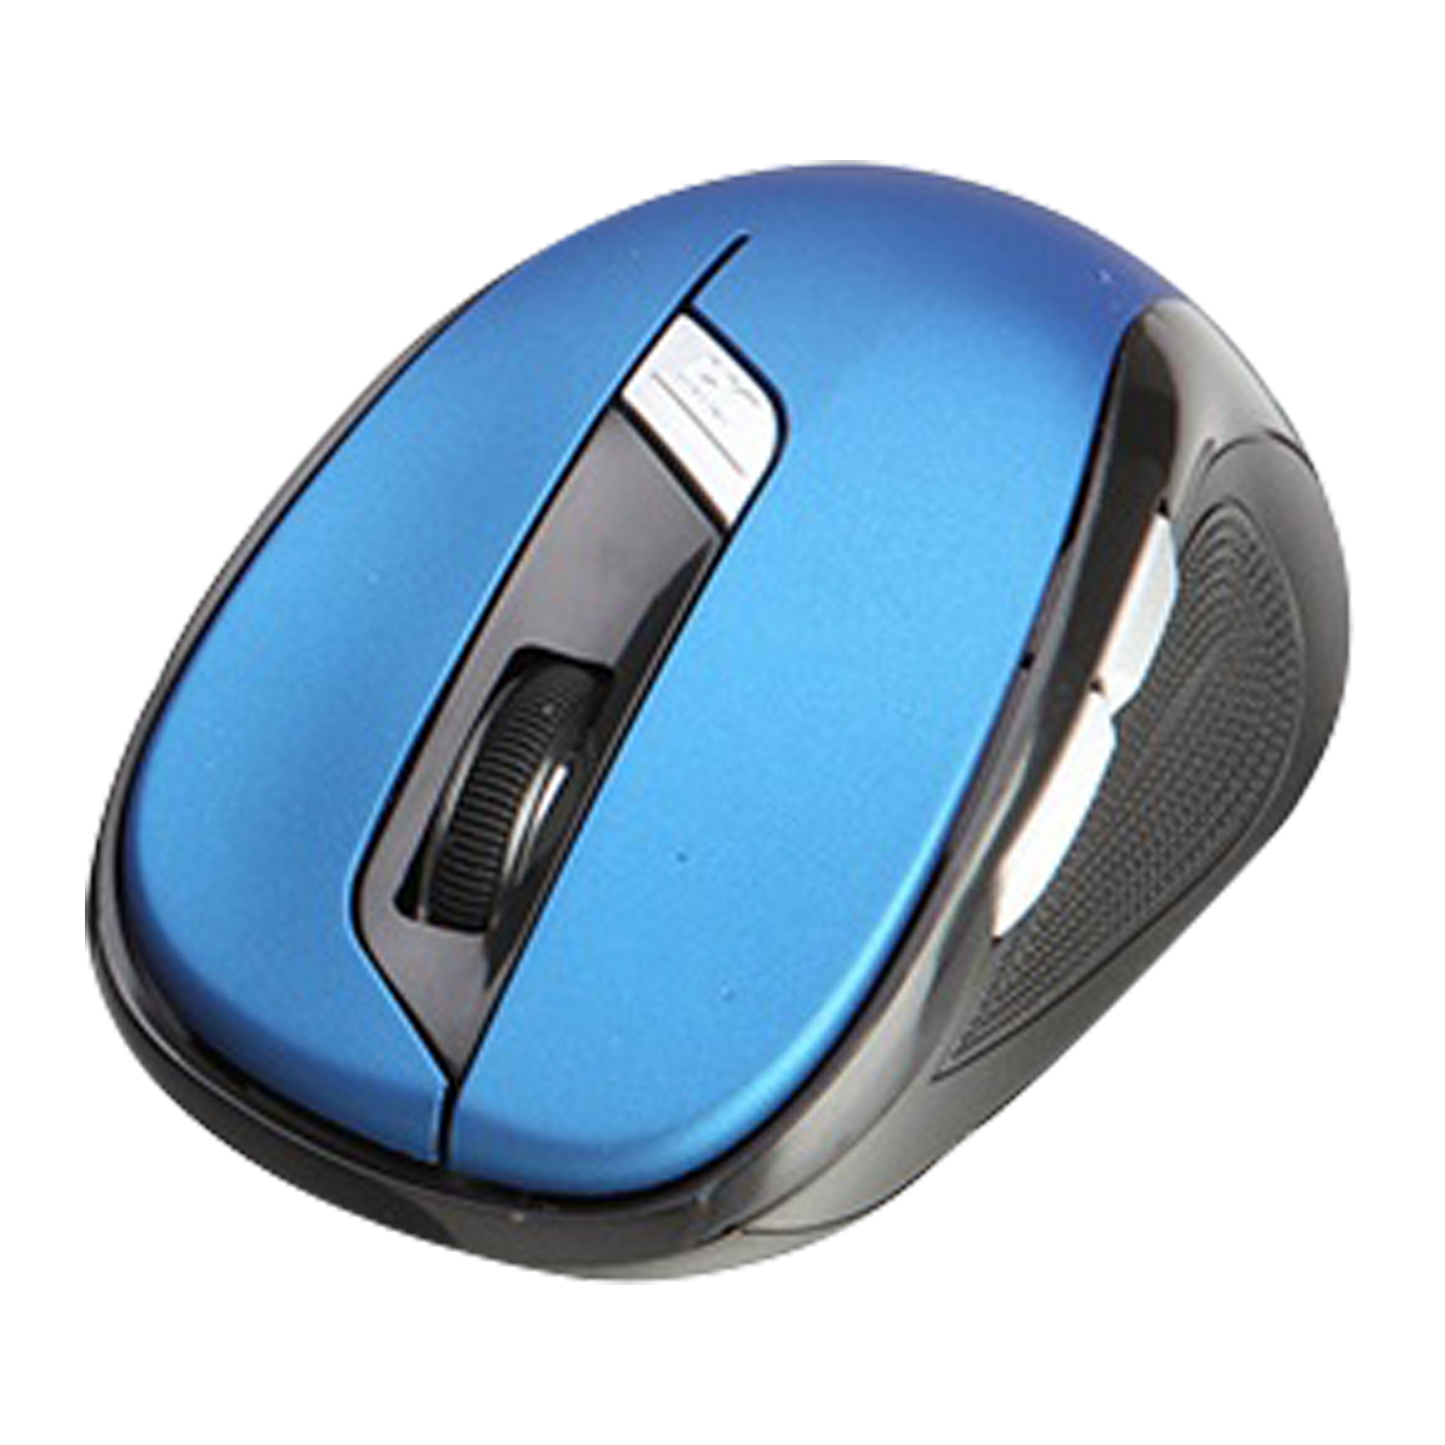 Forev Wireless Optical Mouse FV-109